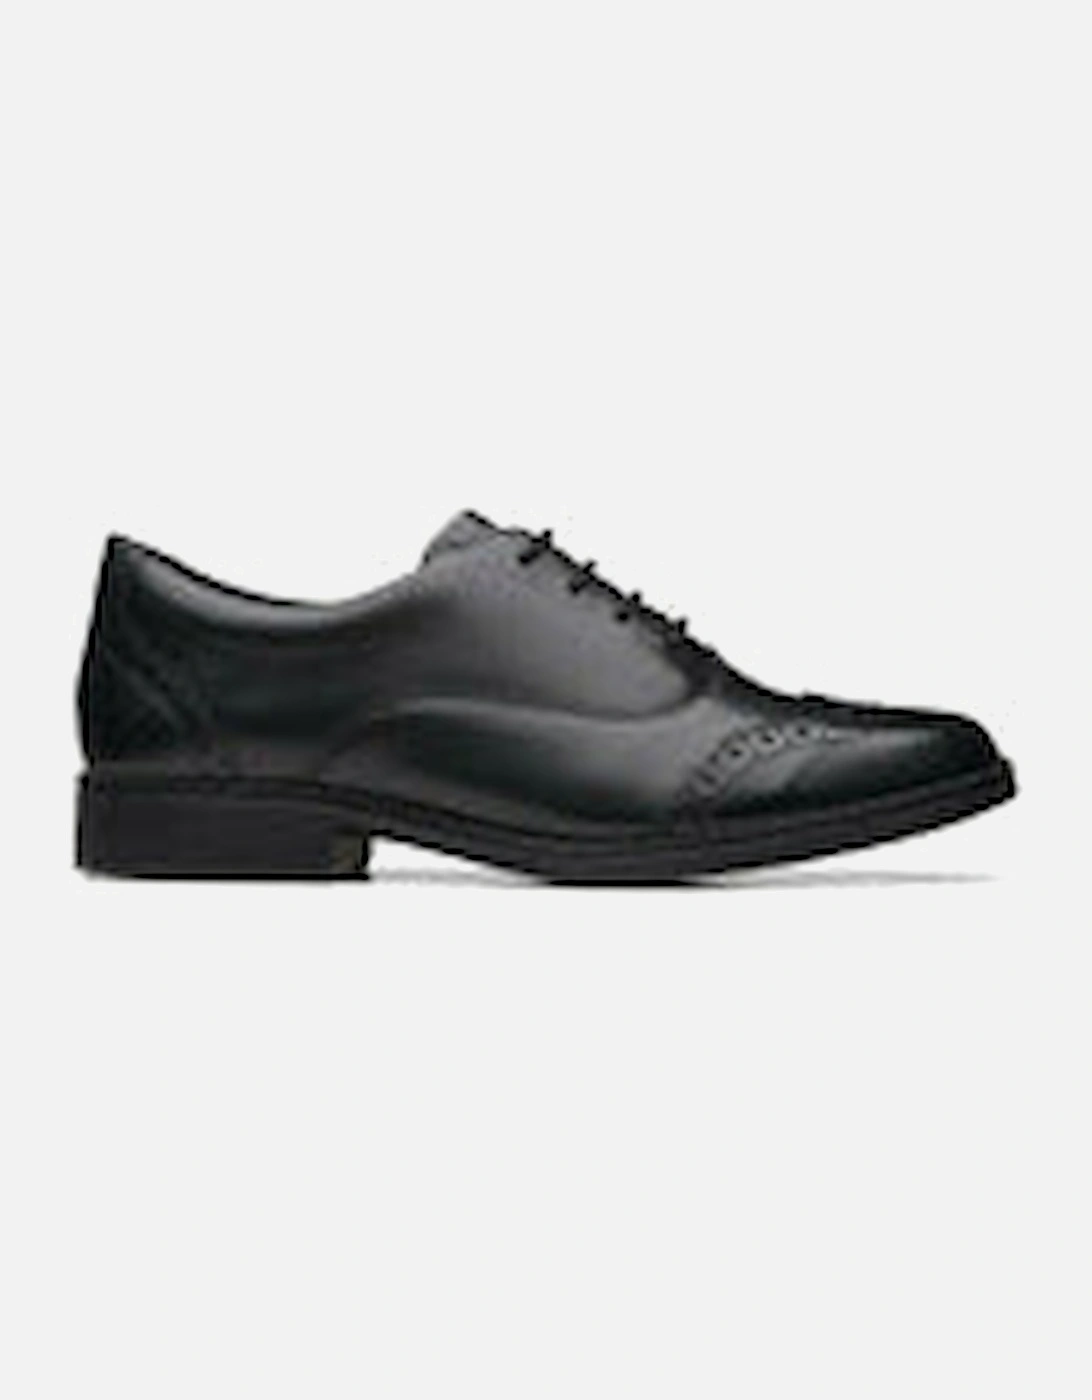 Aubrie Tap Youth black leather